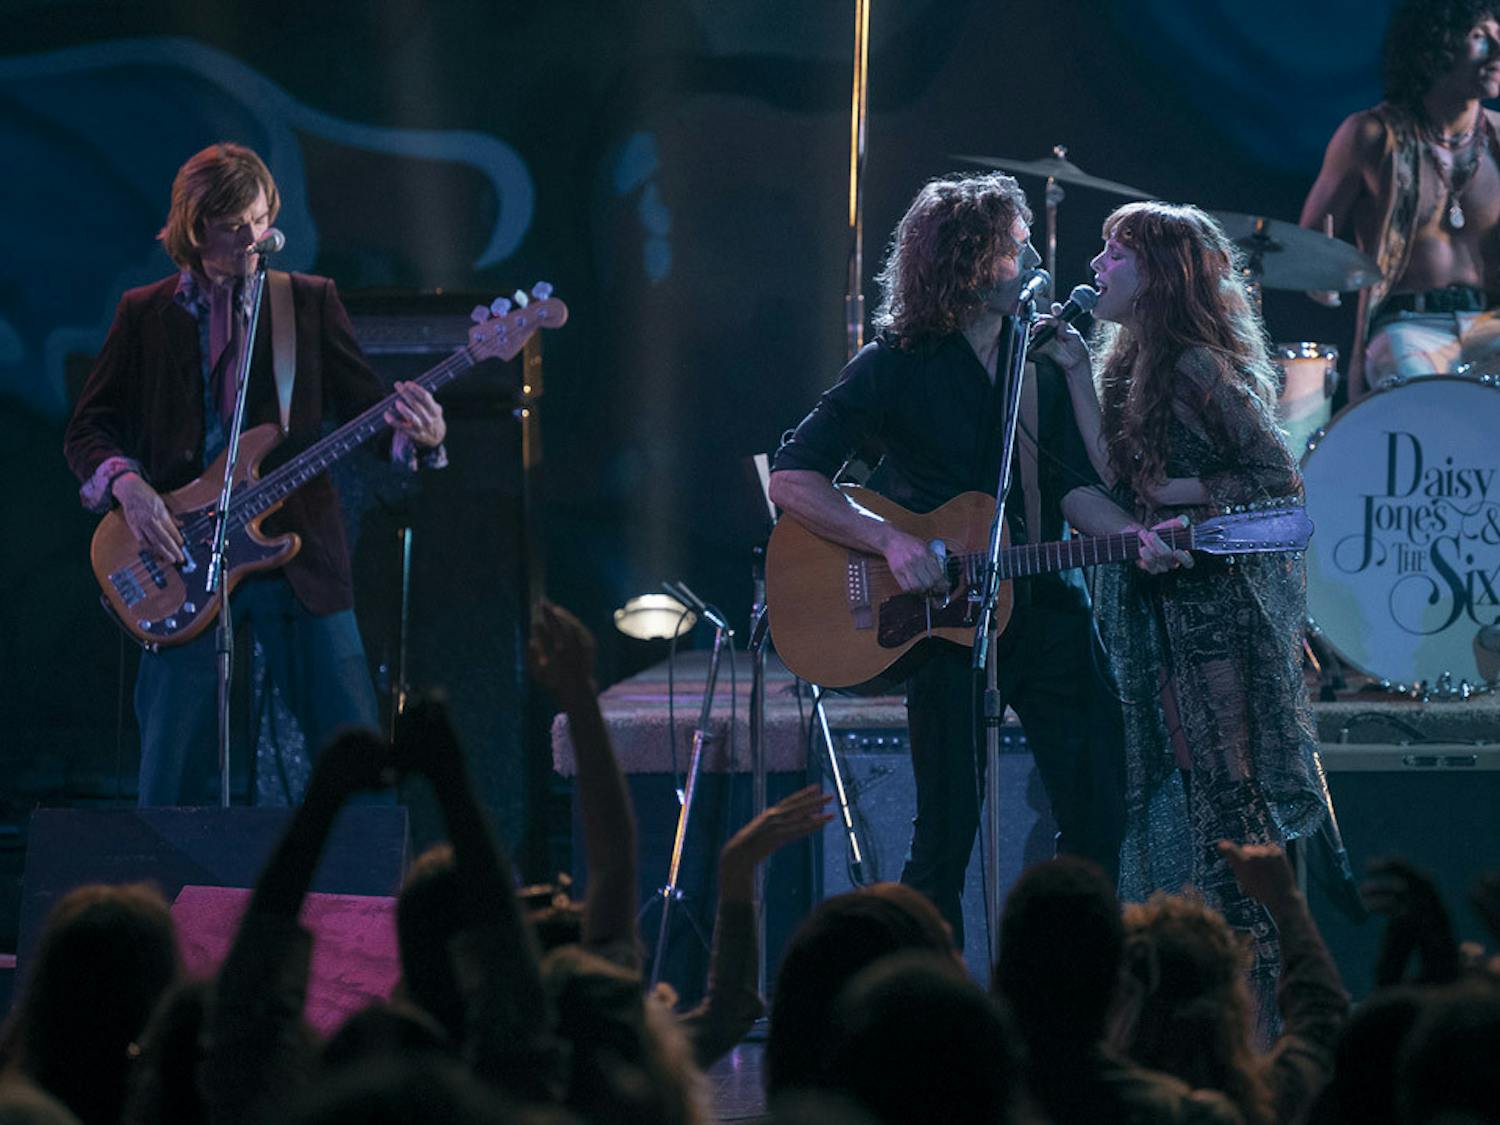 Sam Claflin (center) and Riley Keough (right) sing together during a scene from the drama miniseries, &nbsp;"Daisy Jones &amp; The Six." The series is a live-action adaptation of American author Taylor Jenkins Reid's novel by the same name, and it follows the lives of a fictional 1970s rock band from the perspective of their older selves.&nbsp;